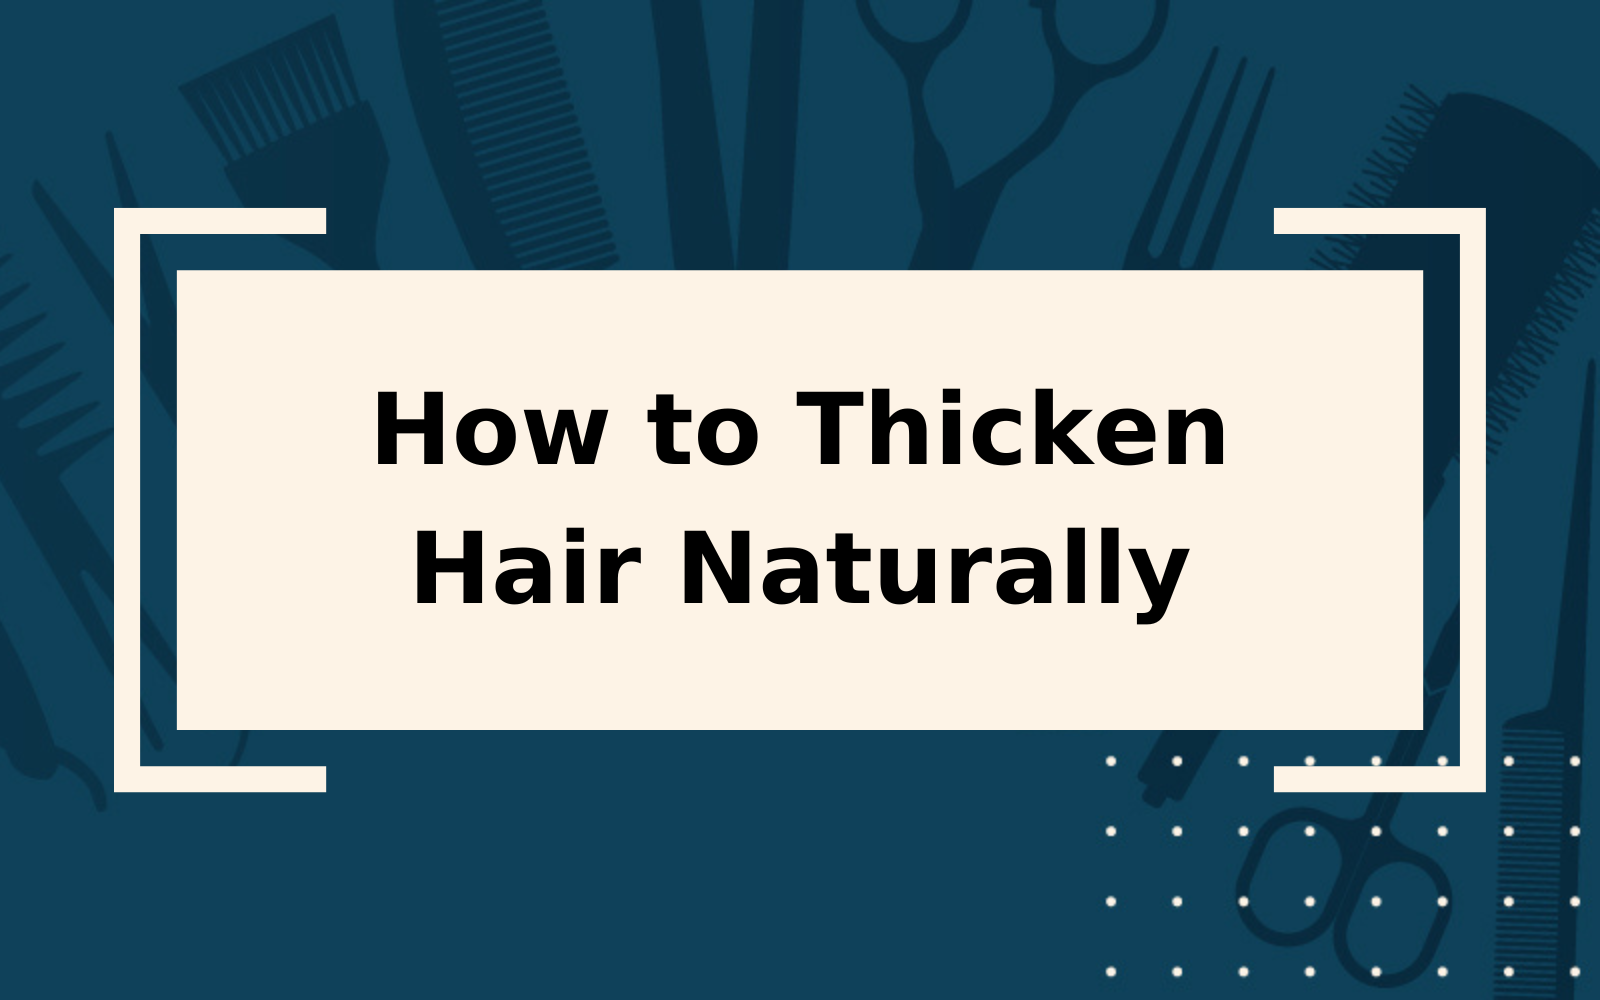 How to Thicken Hair Naturally | Step-by-Step Guide